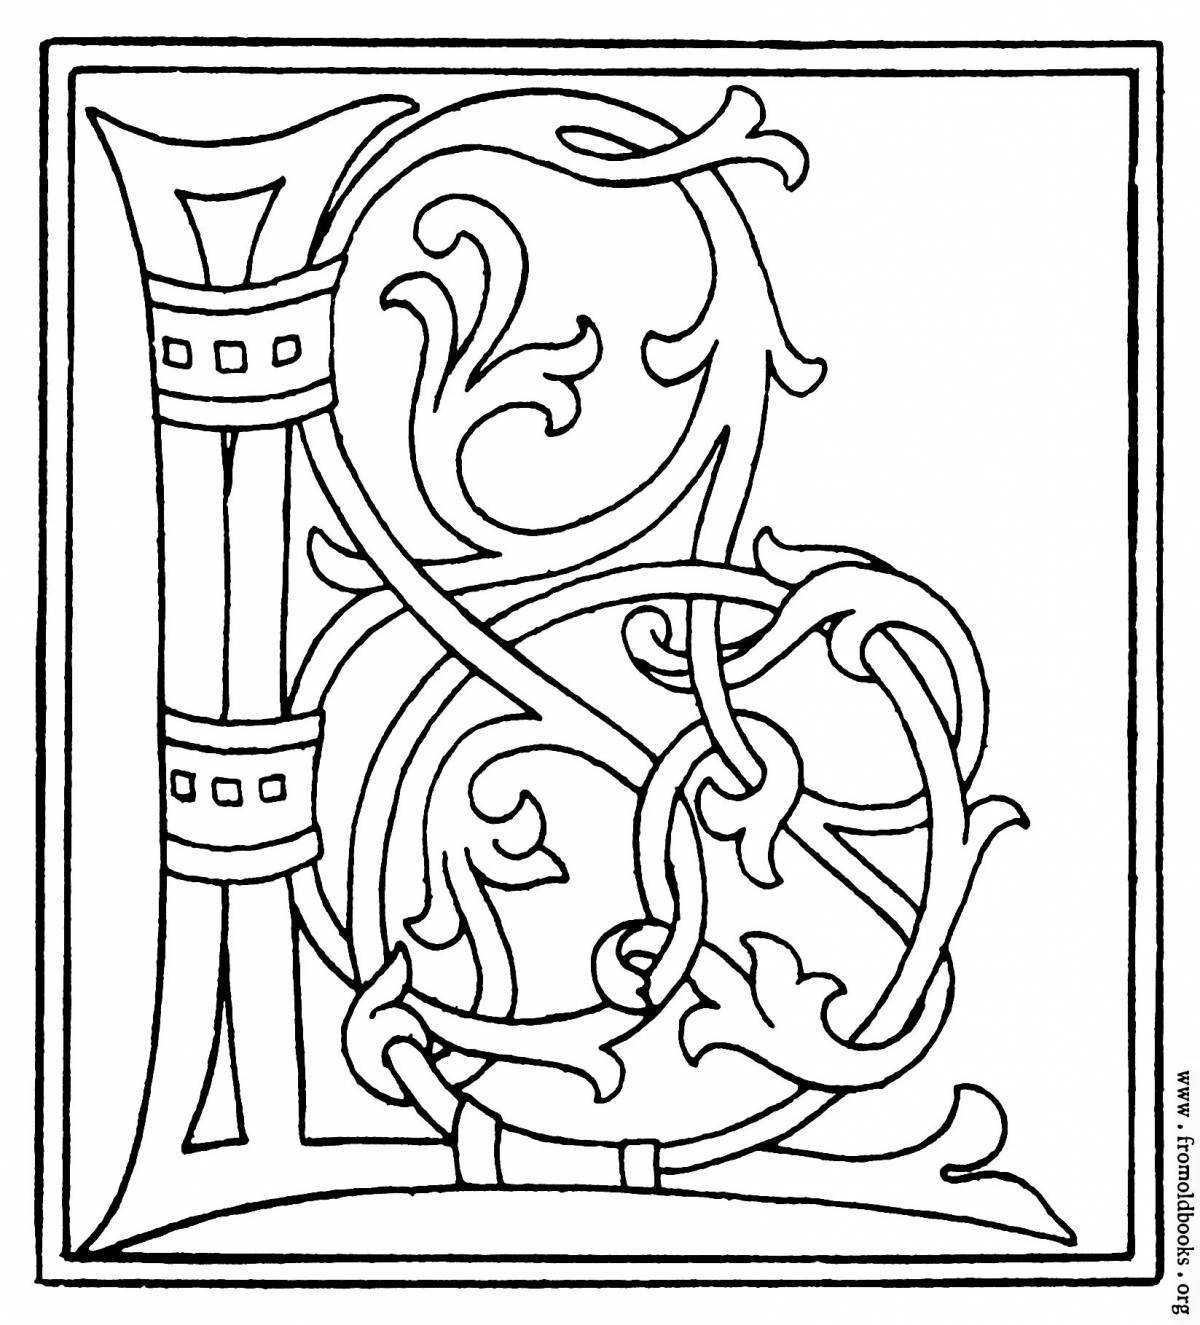 Radiant coloring page slavic initial letter